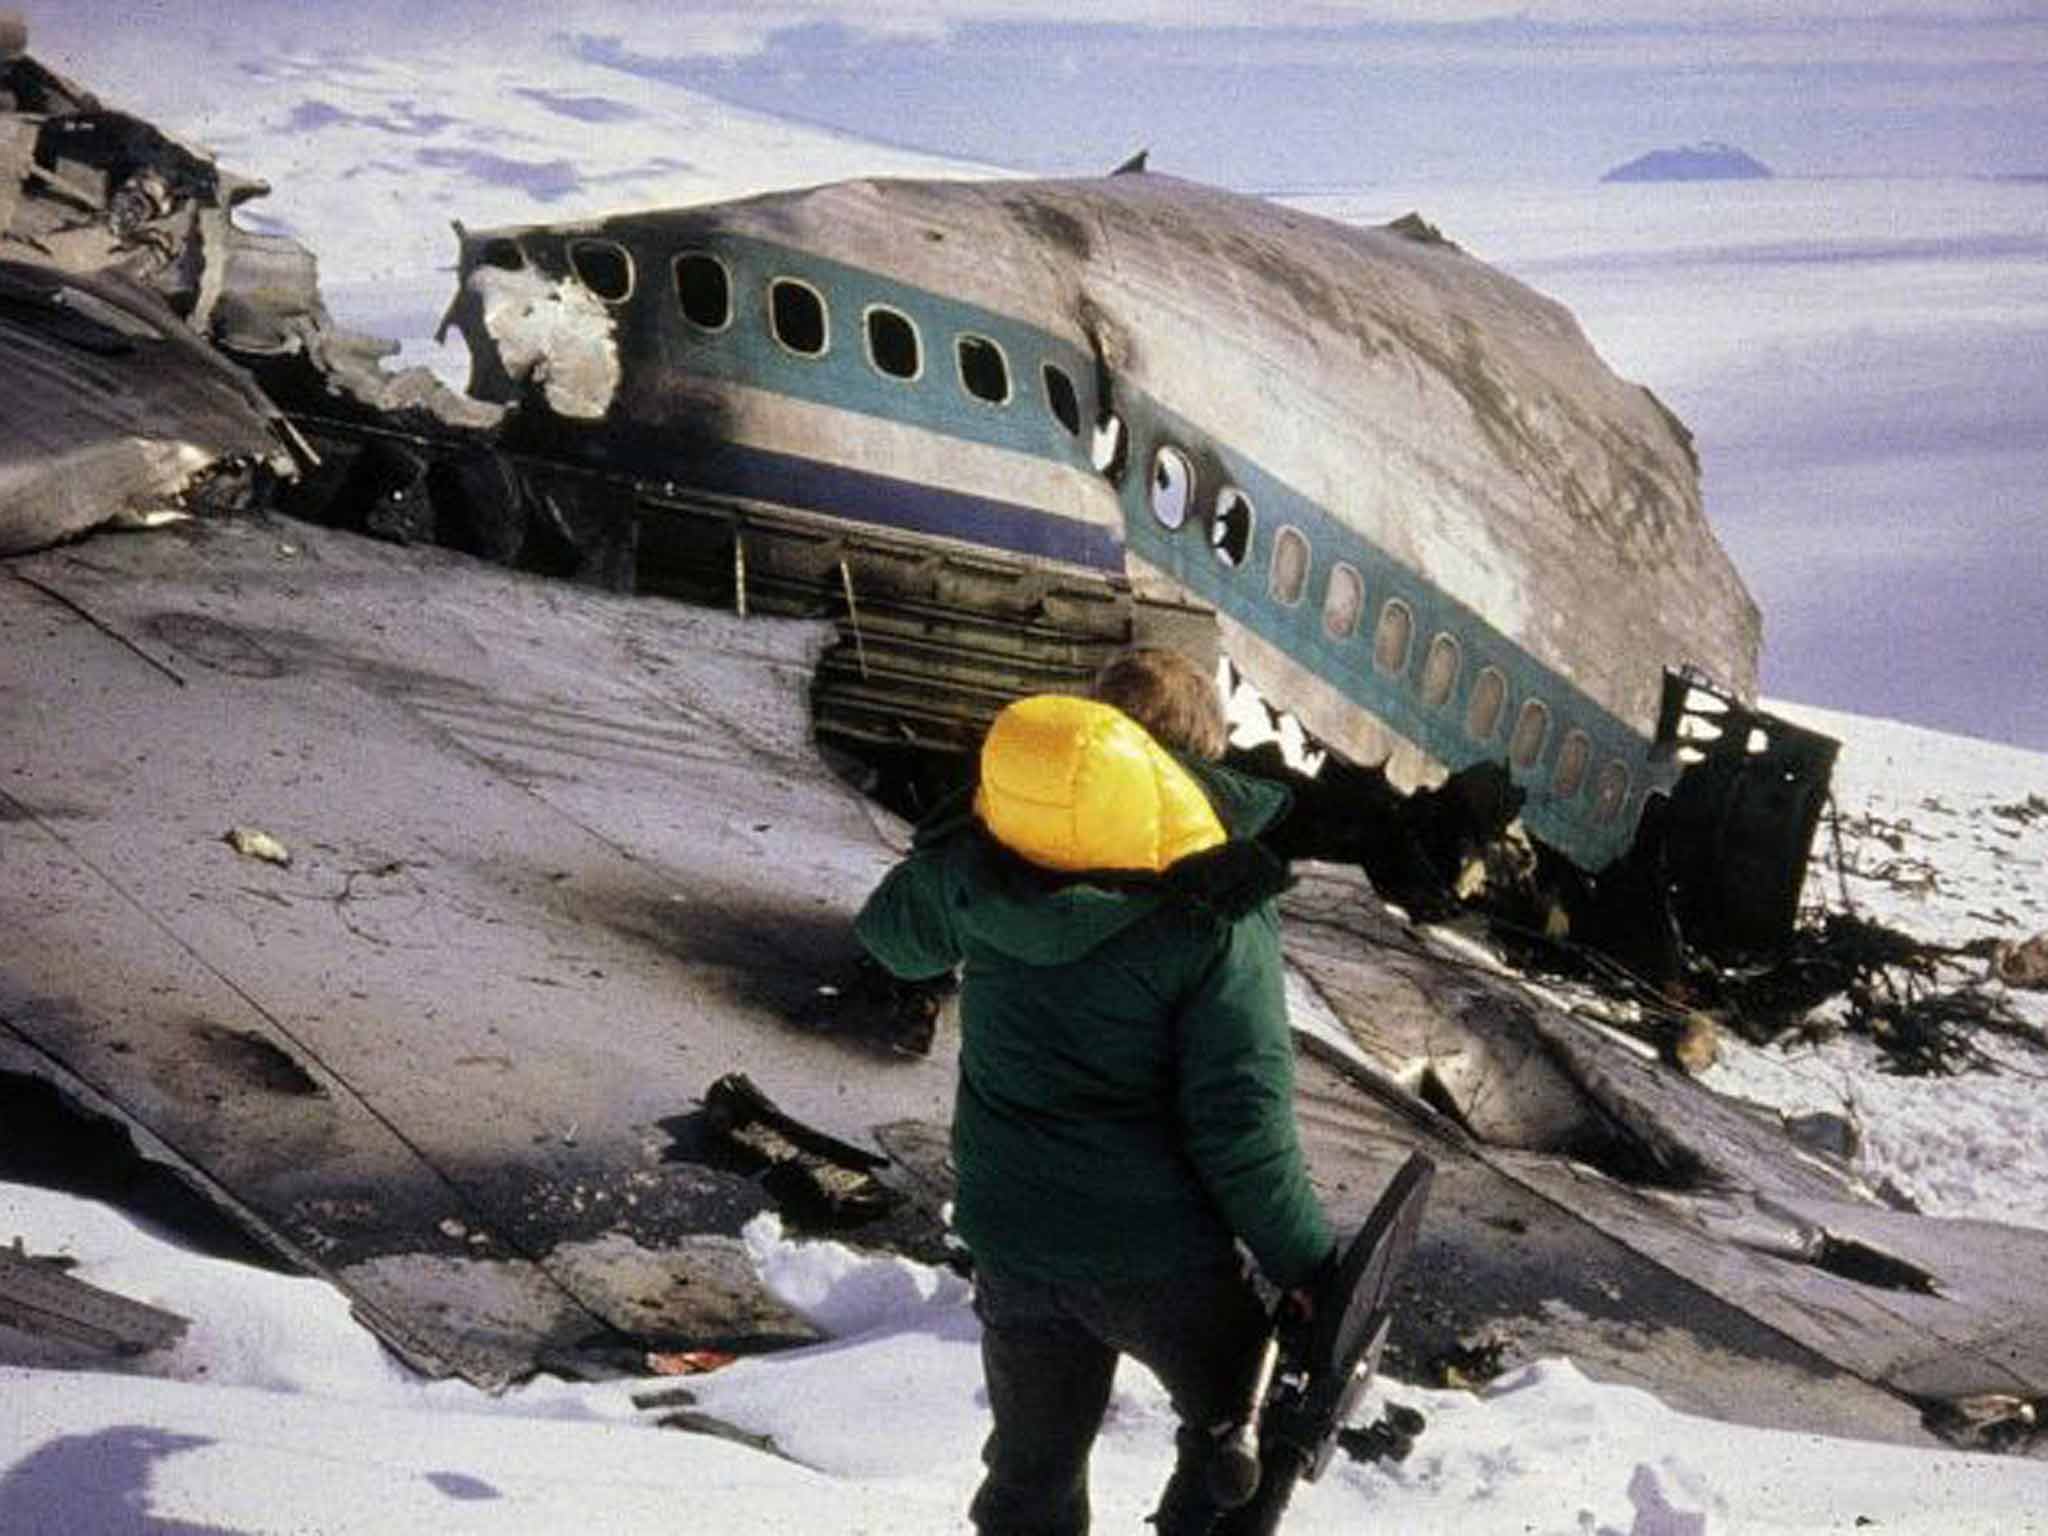 The wreckage of the DC10 plane after the crash in Antarctica (AP)